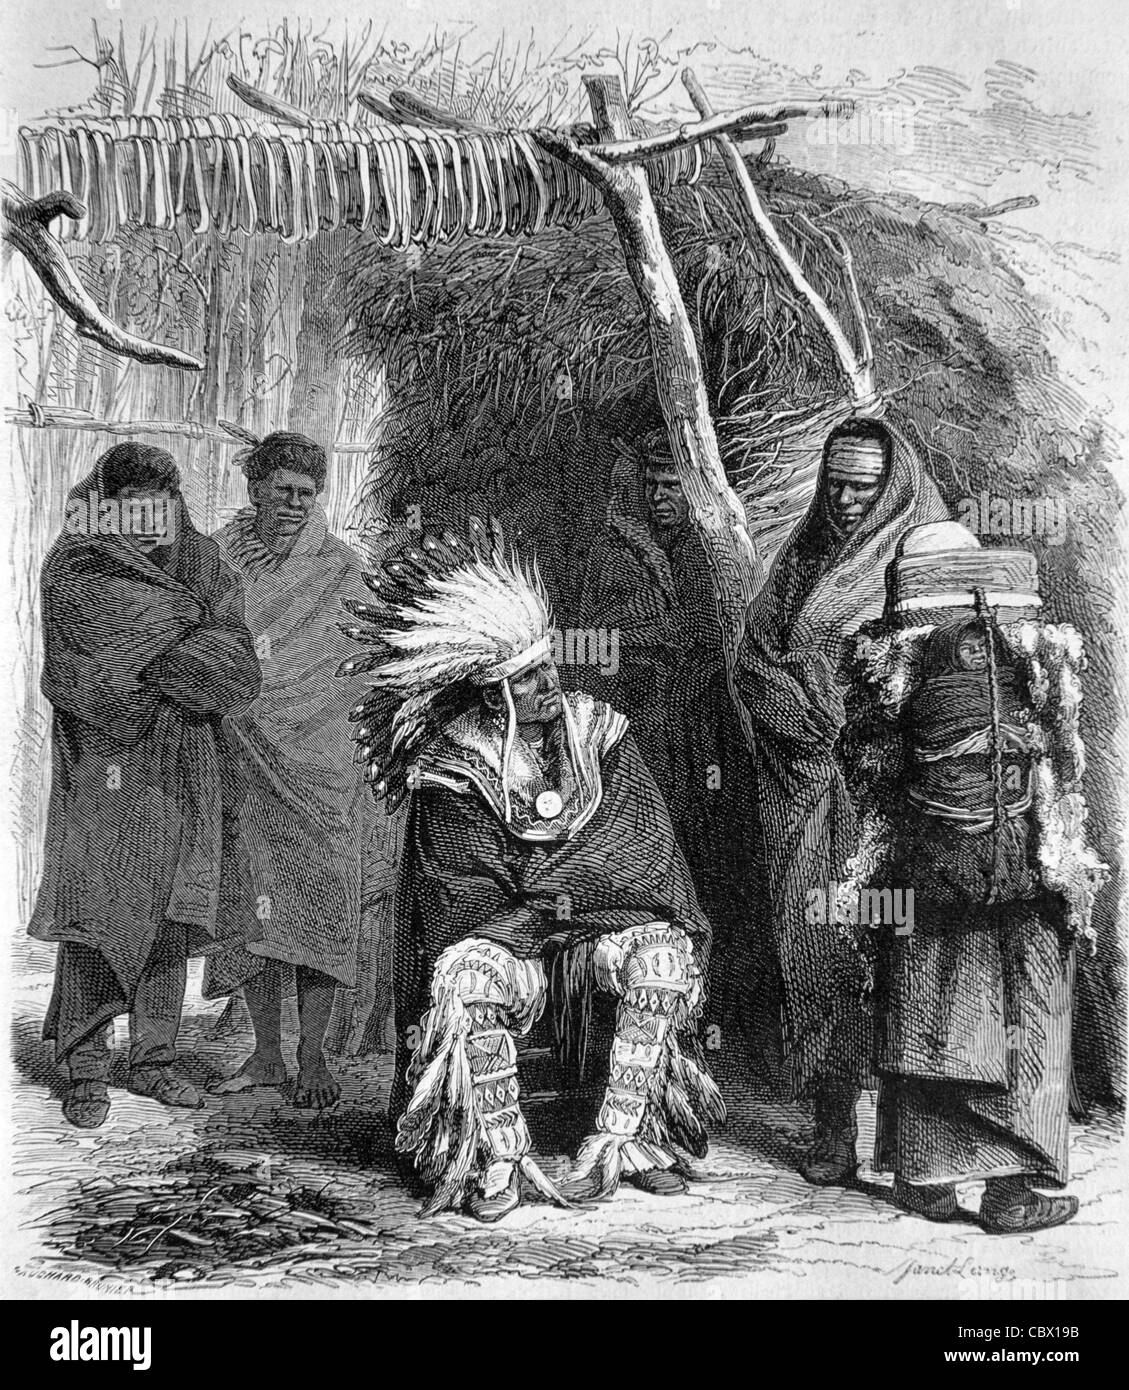 Pawnee Chief & Native American Indian Women in Traditional Costume Outside Tipi, Tepee or Teepee, 1868 Engraving or Vintage Illustration Stock Photo